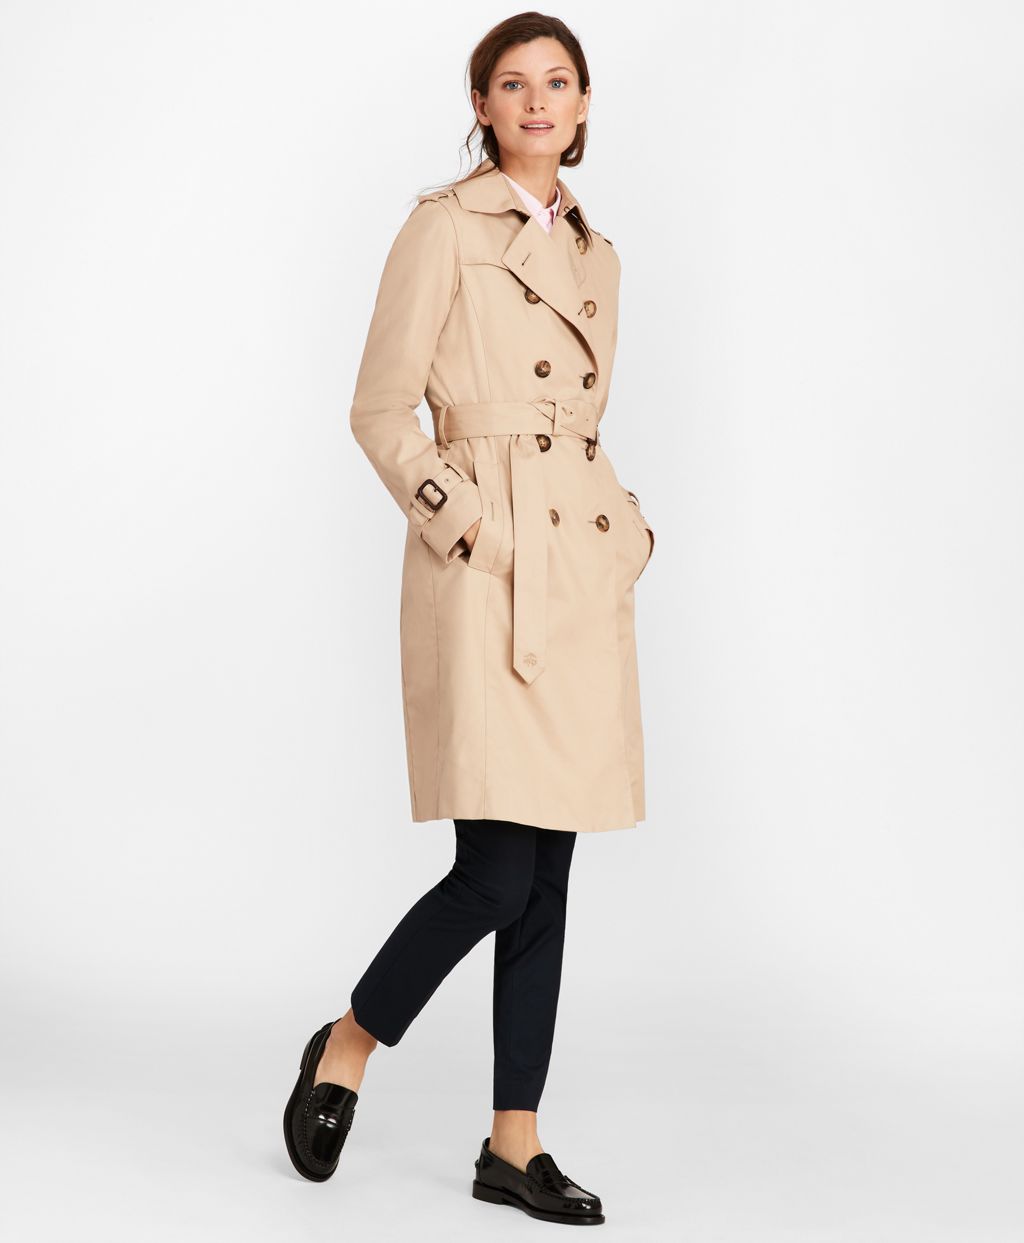 Brooks Brothers Women's Petite Double-Breasted Trench Coat | Brooks Brothers